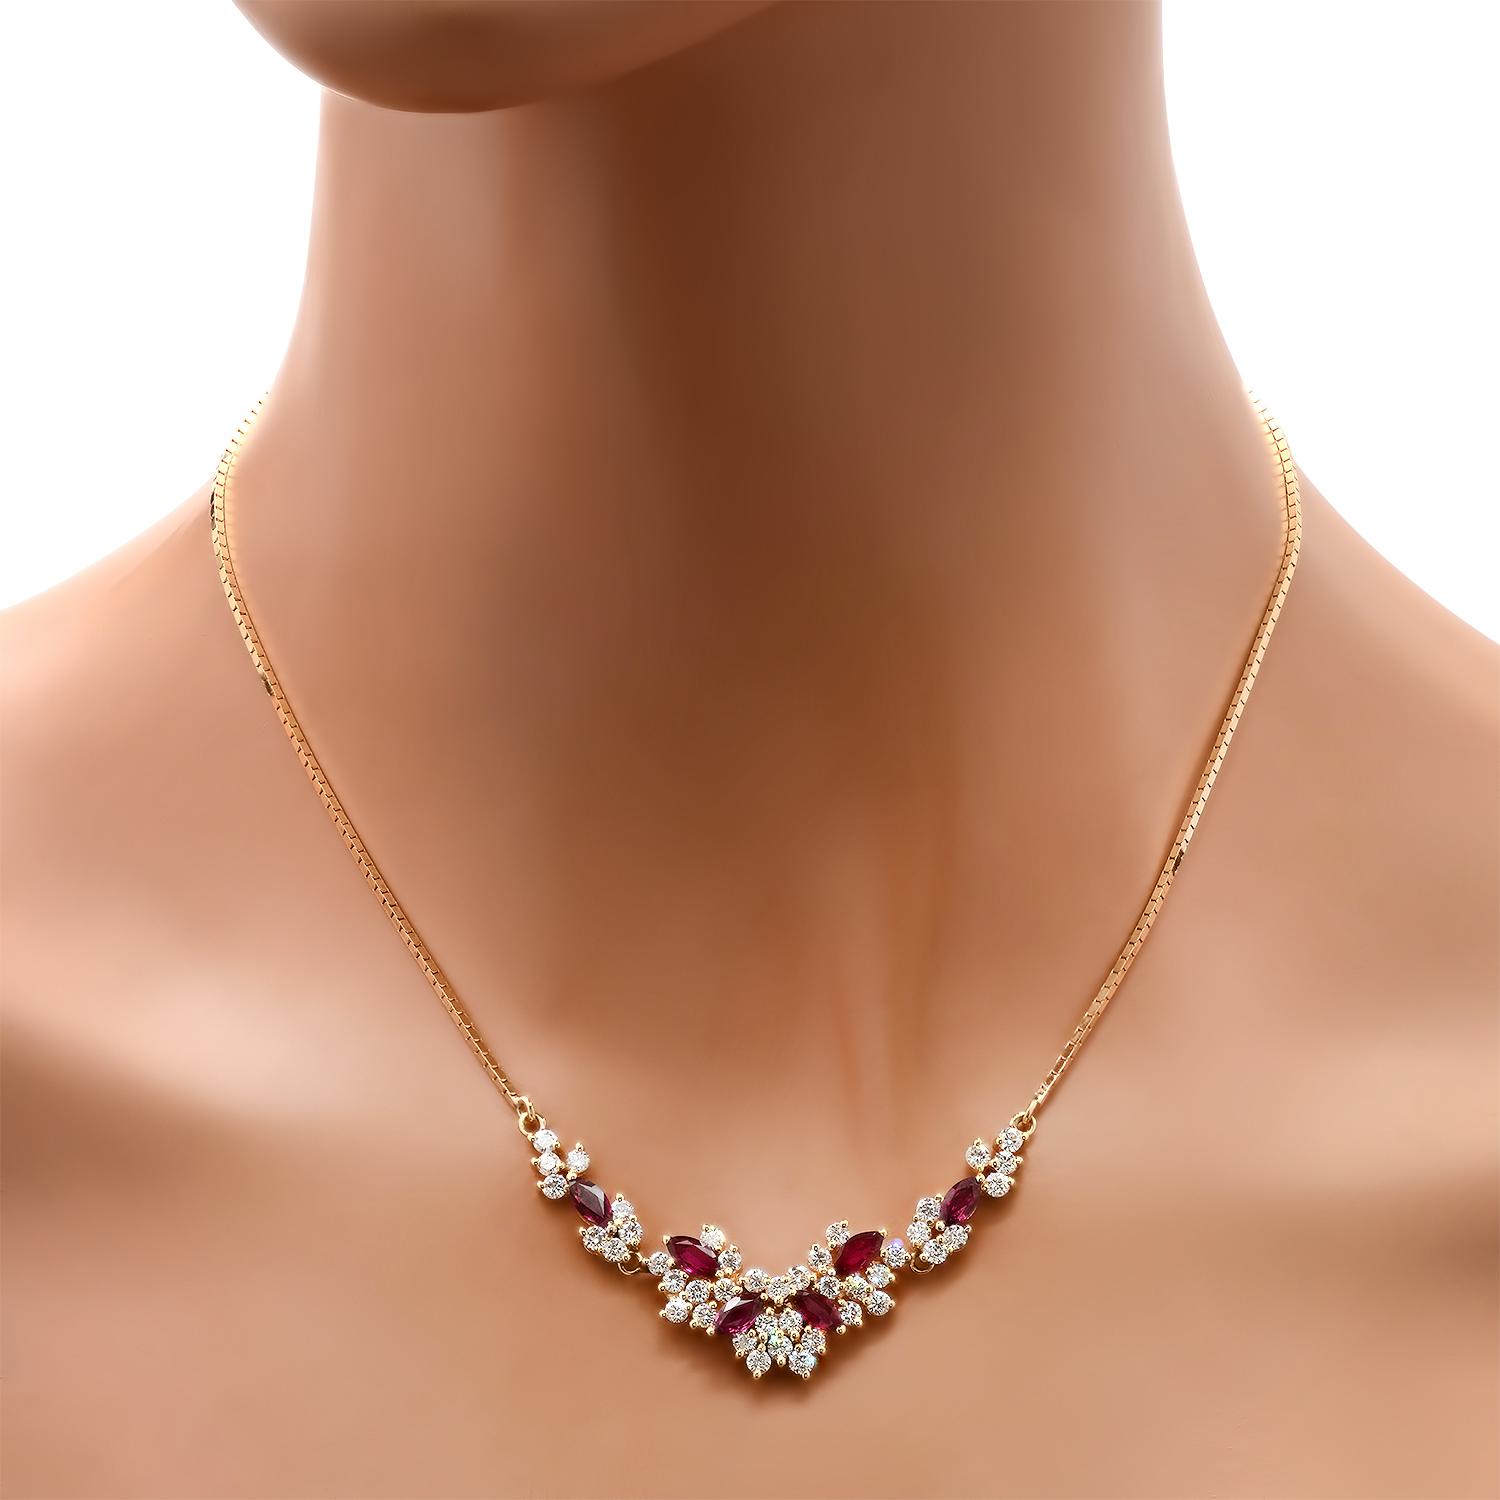 14K Yellow Gold Setting with 1.90ct Ruby and 2.68ct Diamond Necklace